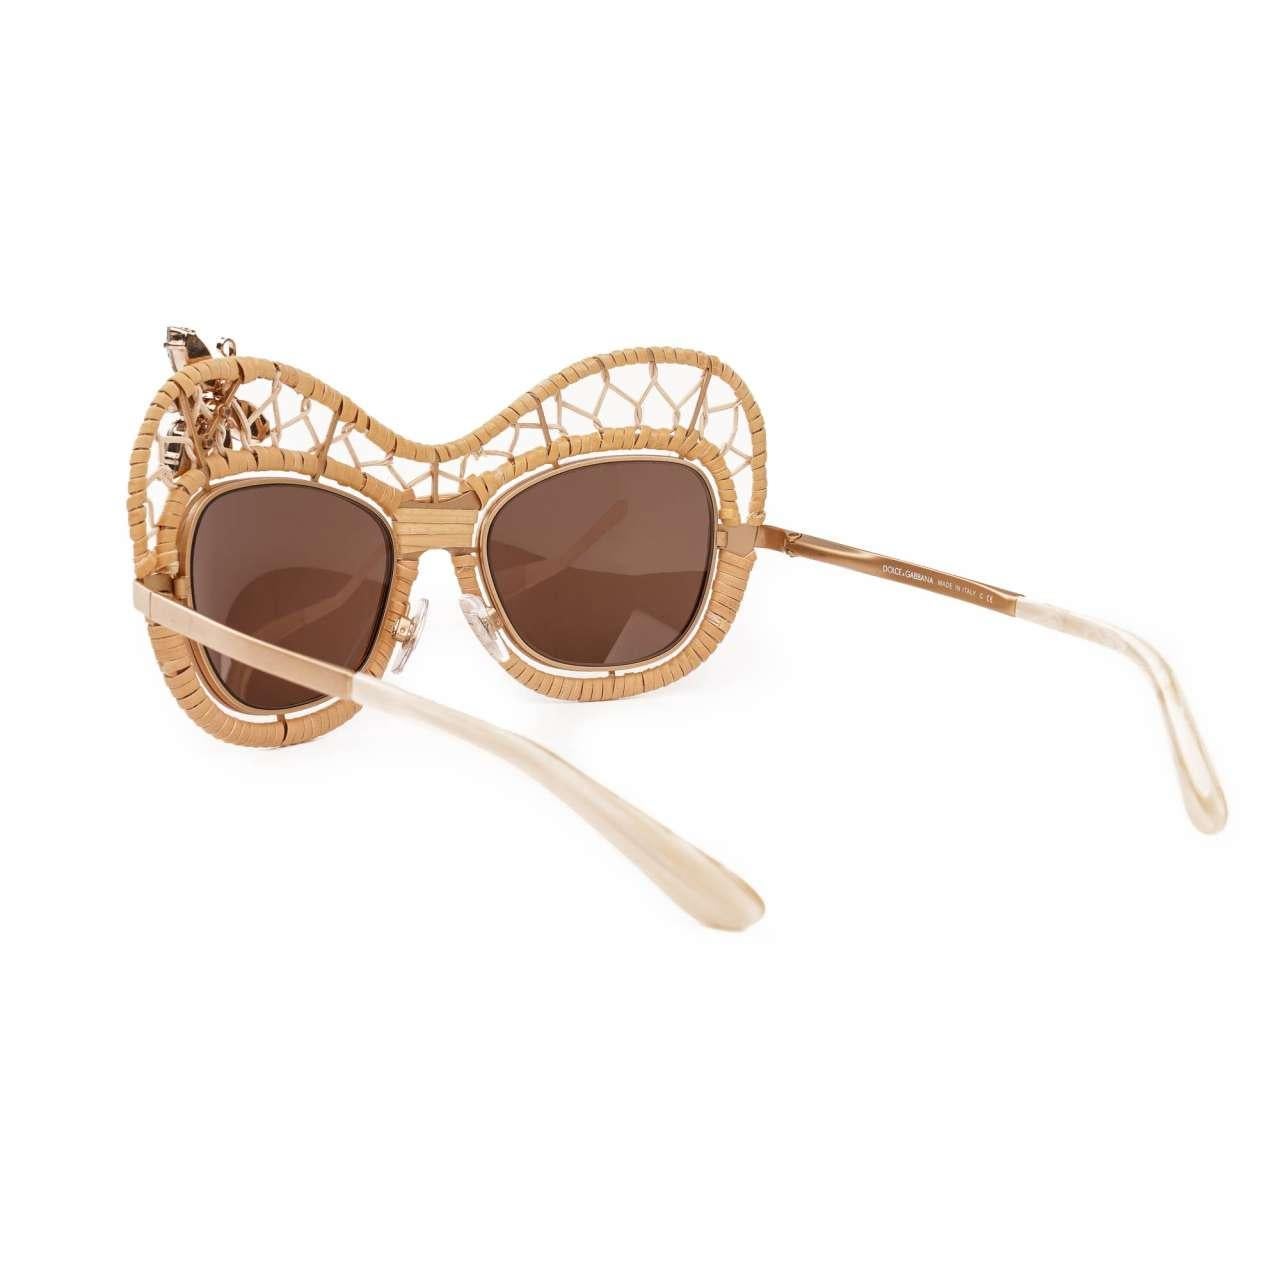 D&G-Special Edition Straw Butterfly Sunglasses DG2159-B with Crystals Beige Gold In Excellent Condition For Sale In Erkrath, DE